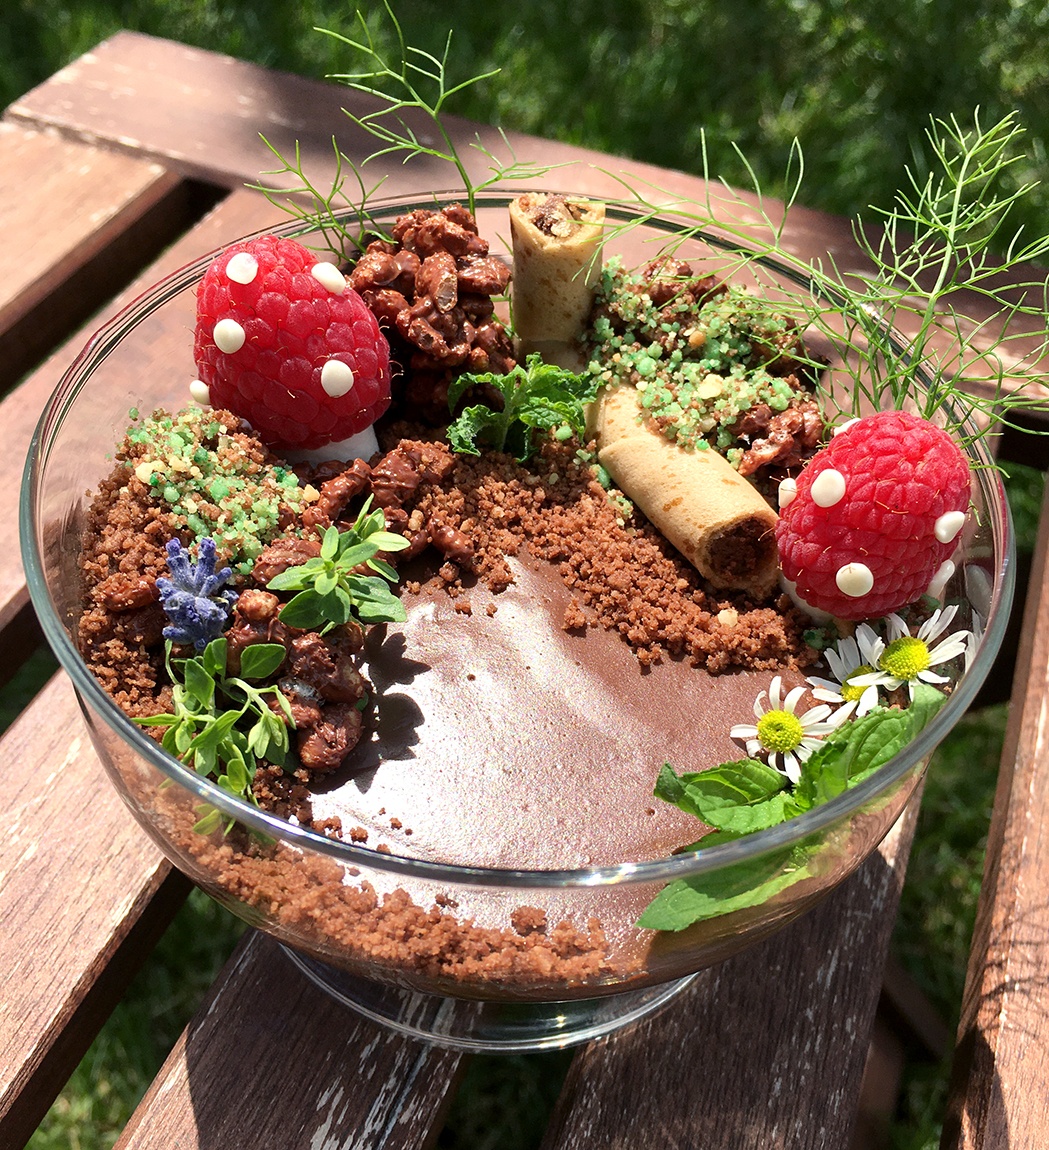 An edible arrangement in a glass bowl which includes chocolate pudding, raspberries, and flowers.